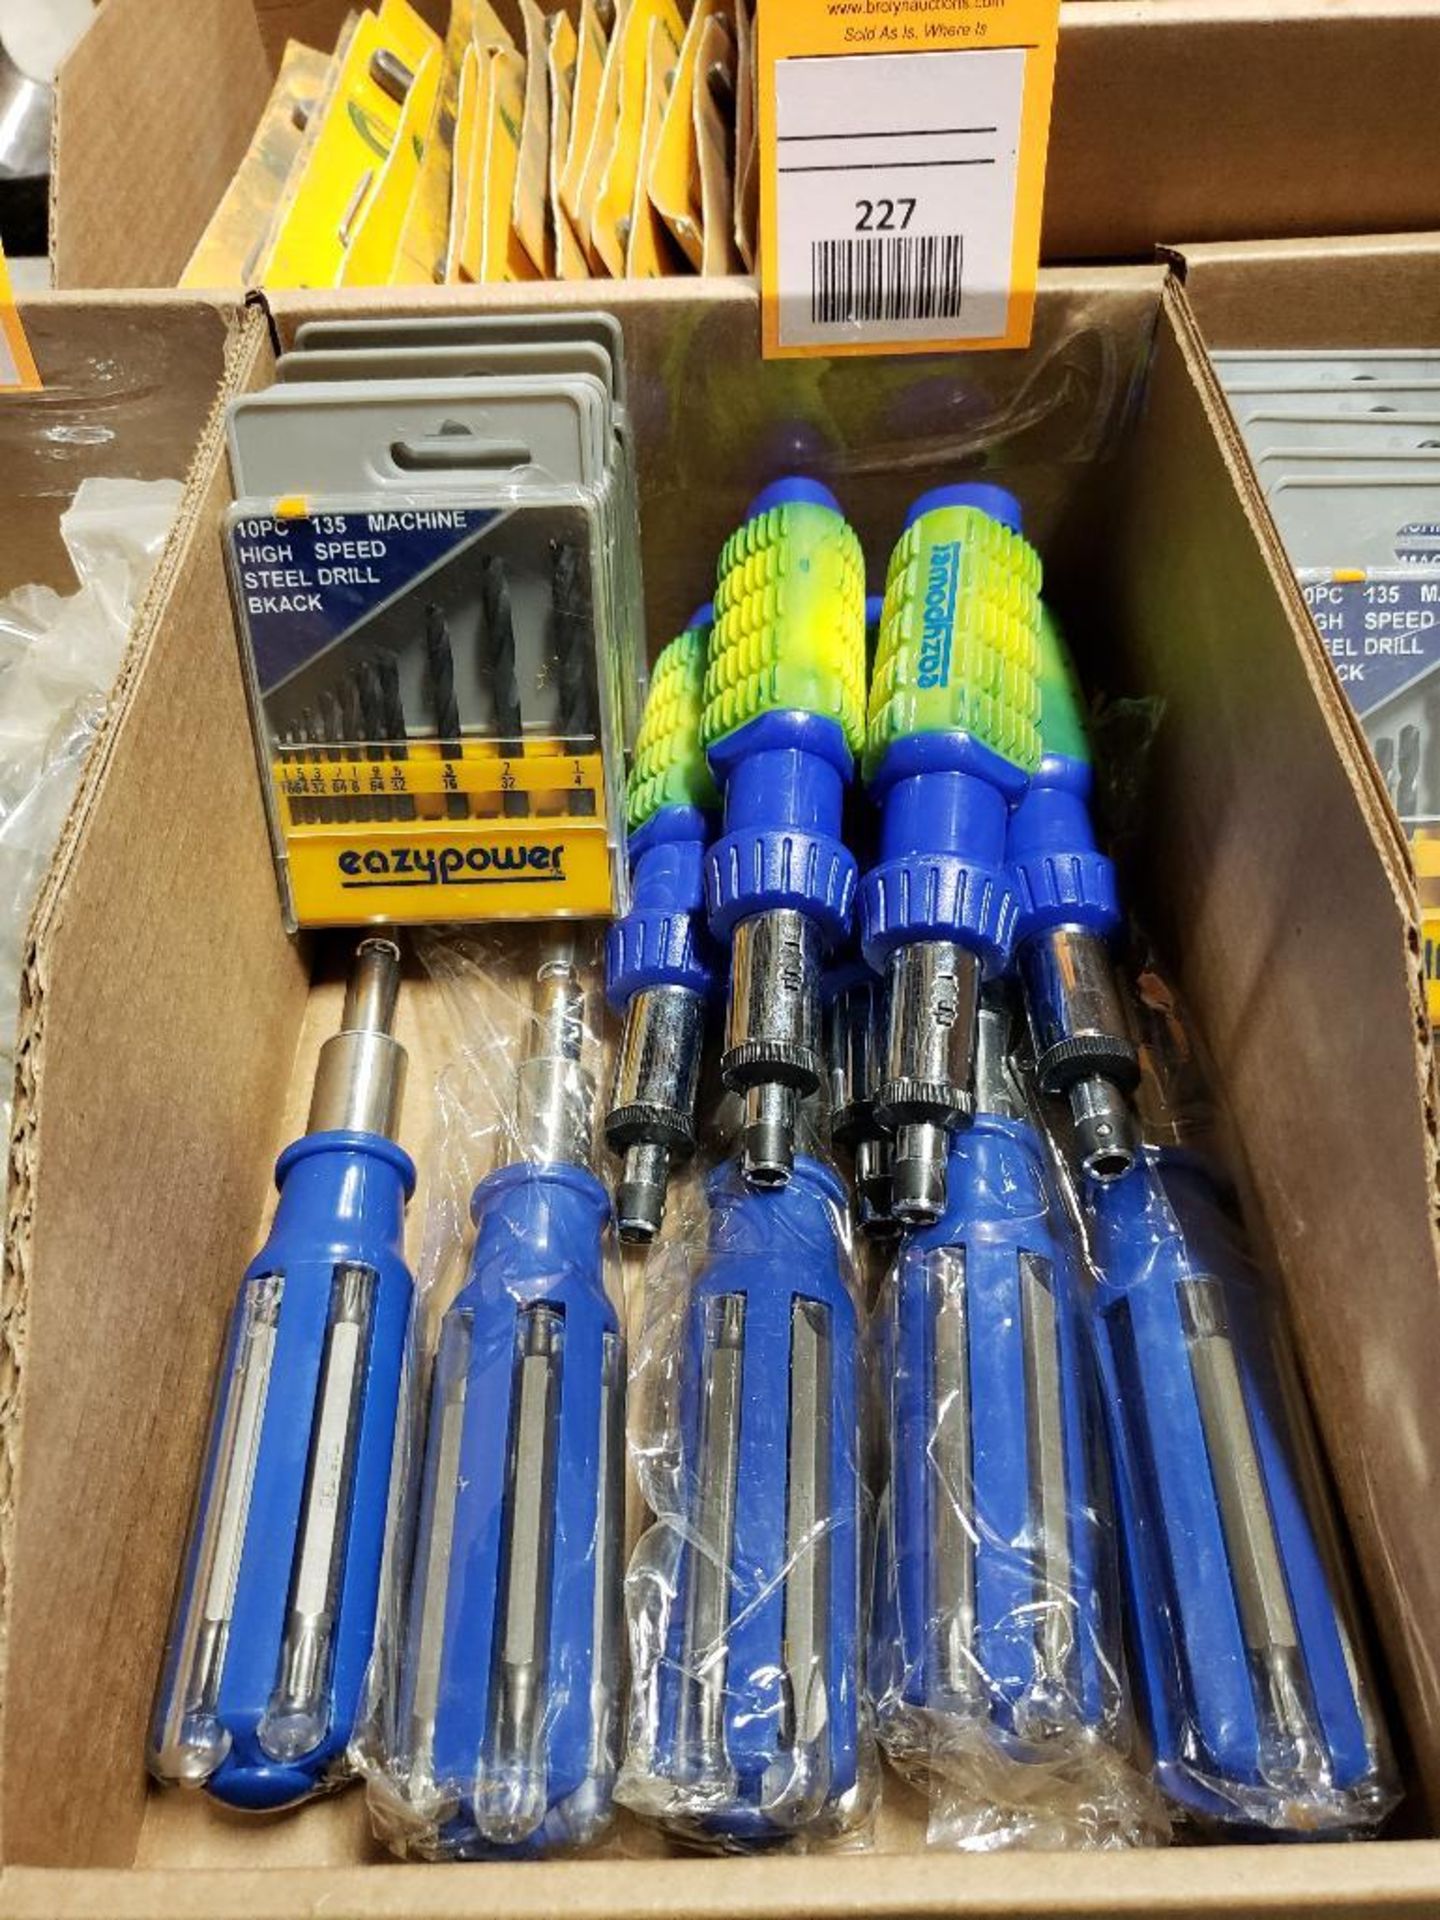 Large assortment of drill bit, screw driver, and bit sets. New as pictured.